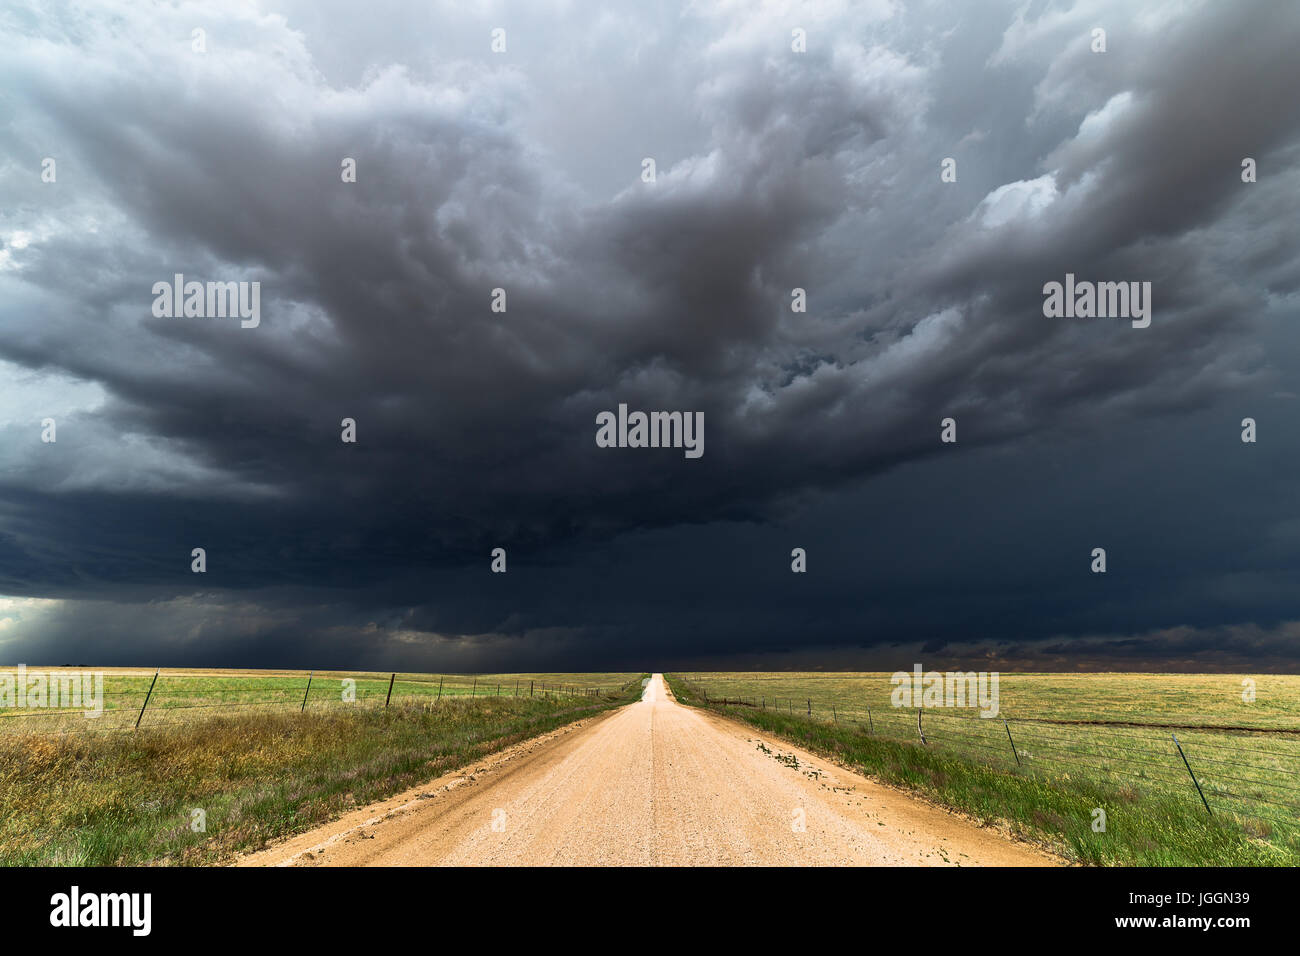 Dirt road and dark clouds with stormy sky over a field in Colorado Stock Photo